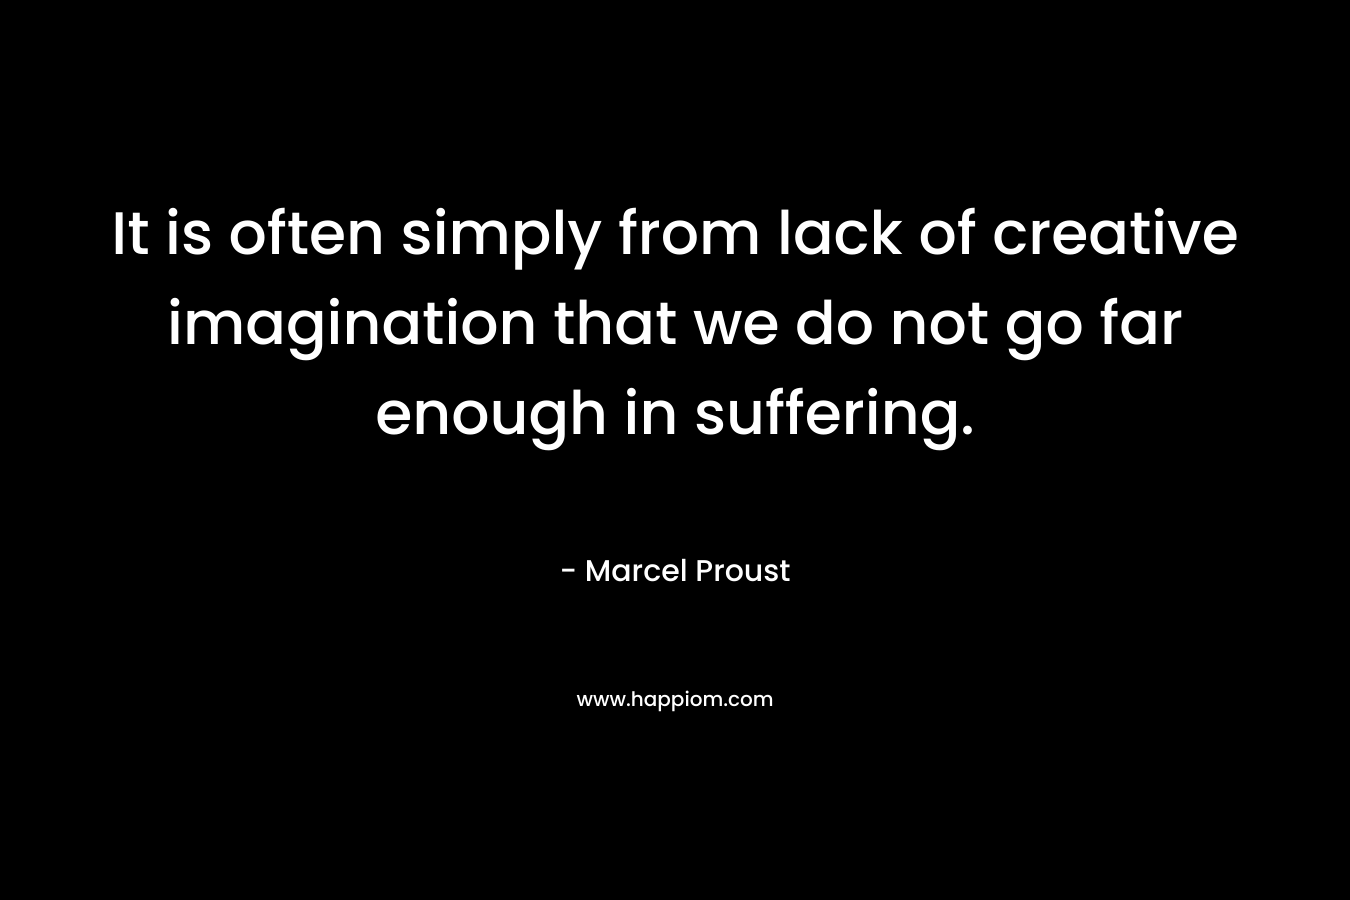 It is often simply from lack of creative imagination that we do not go far enough in suffering.